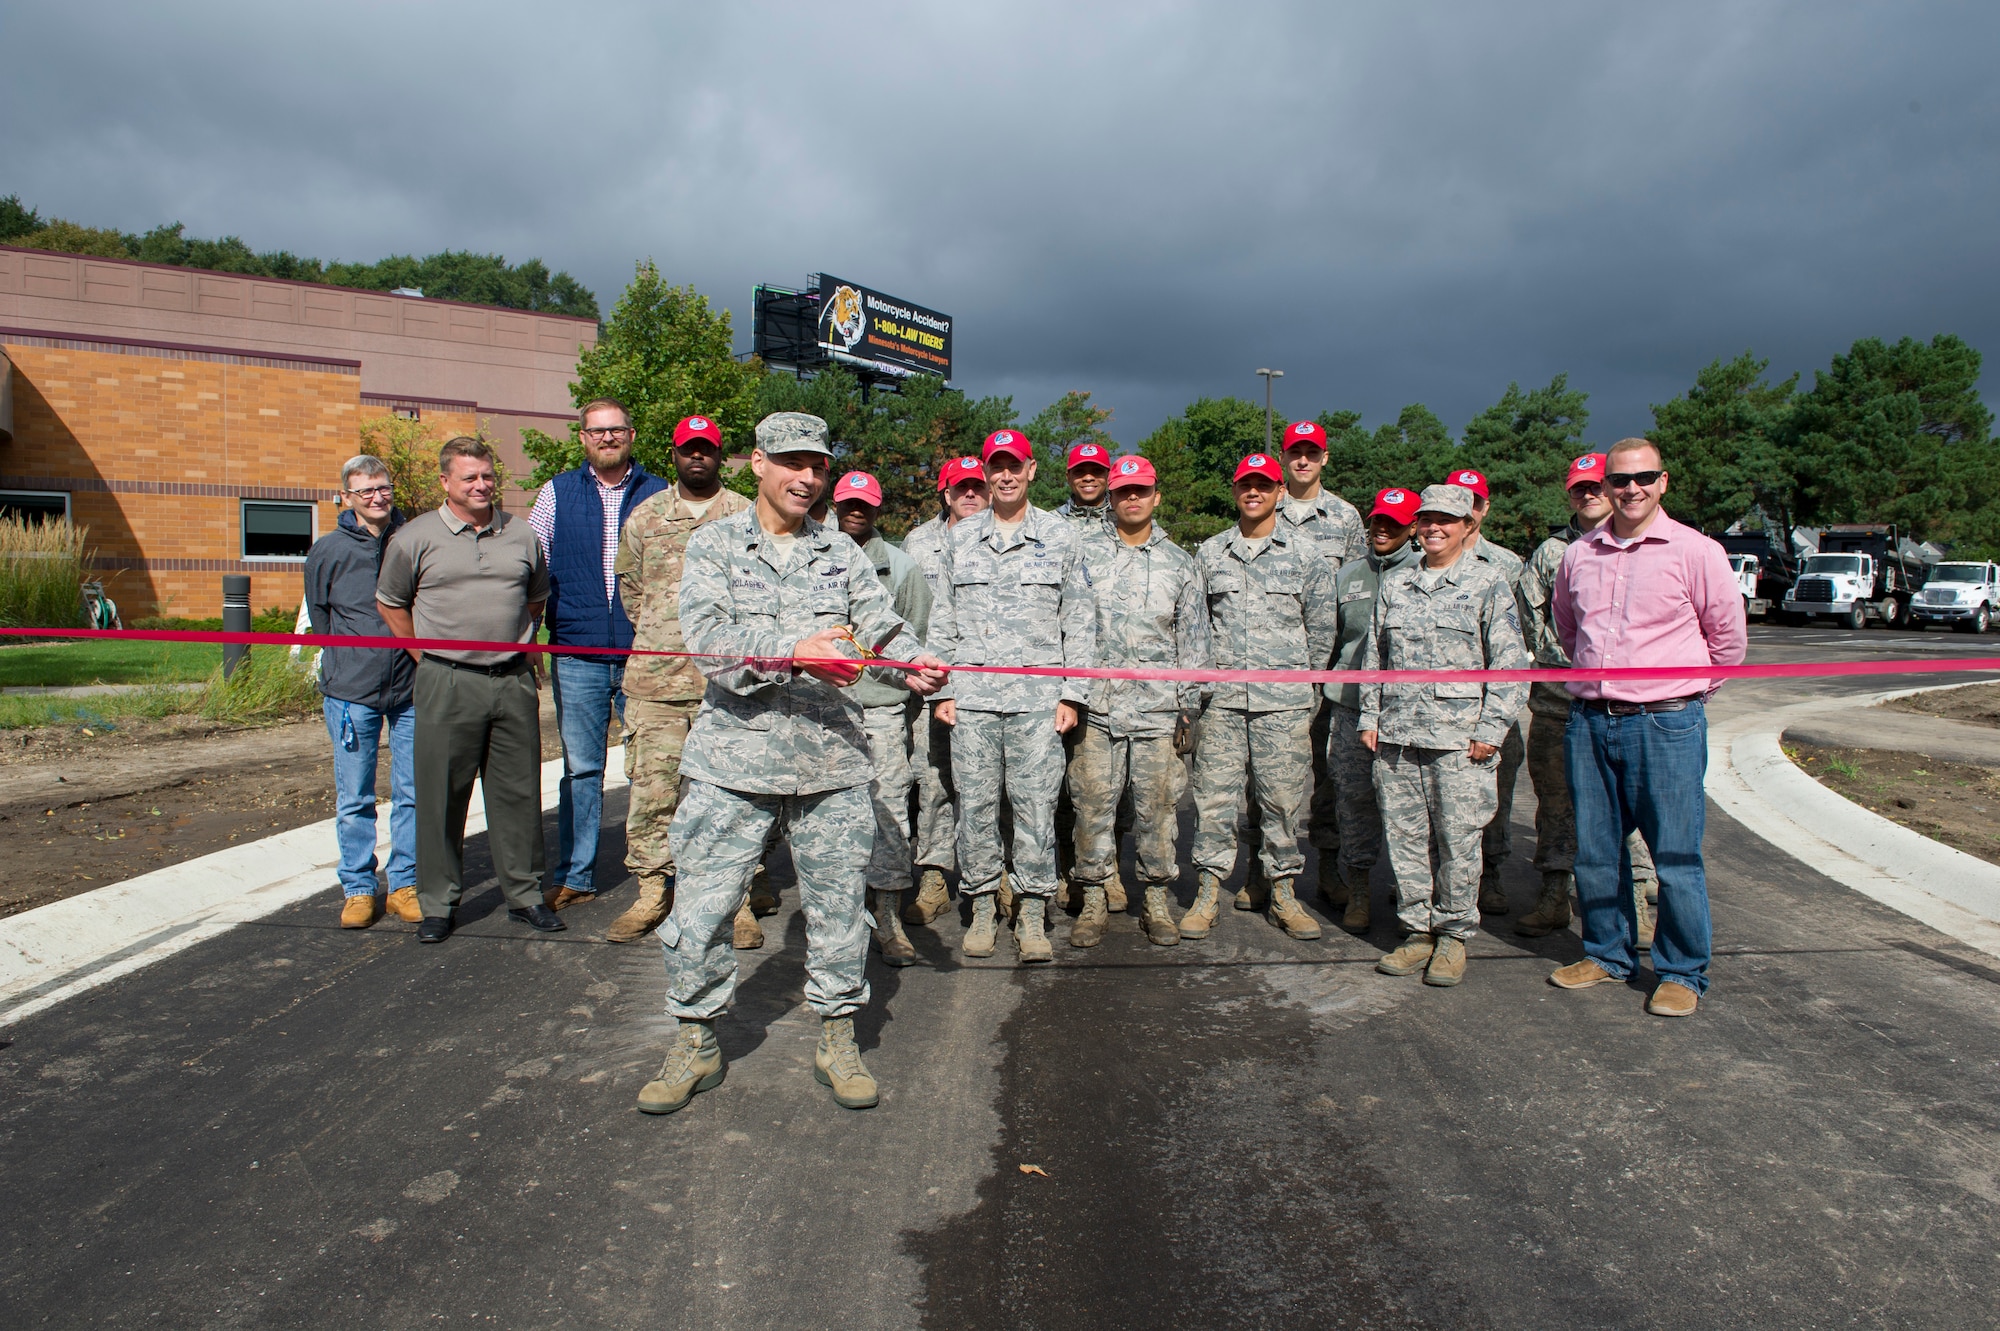 Col. Anthony Polashek, 934th Airlift Wing commander, cut the ceremonial ribbon for the opening of a new perimeter road at the Minneapolis-St. Paul Air Reserve Station, September 13, 2019.  (U.S. Air Force photo by Chris Farley)